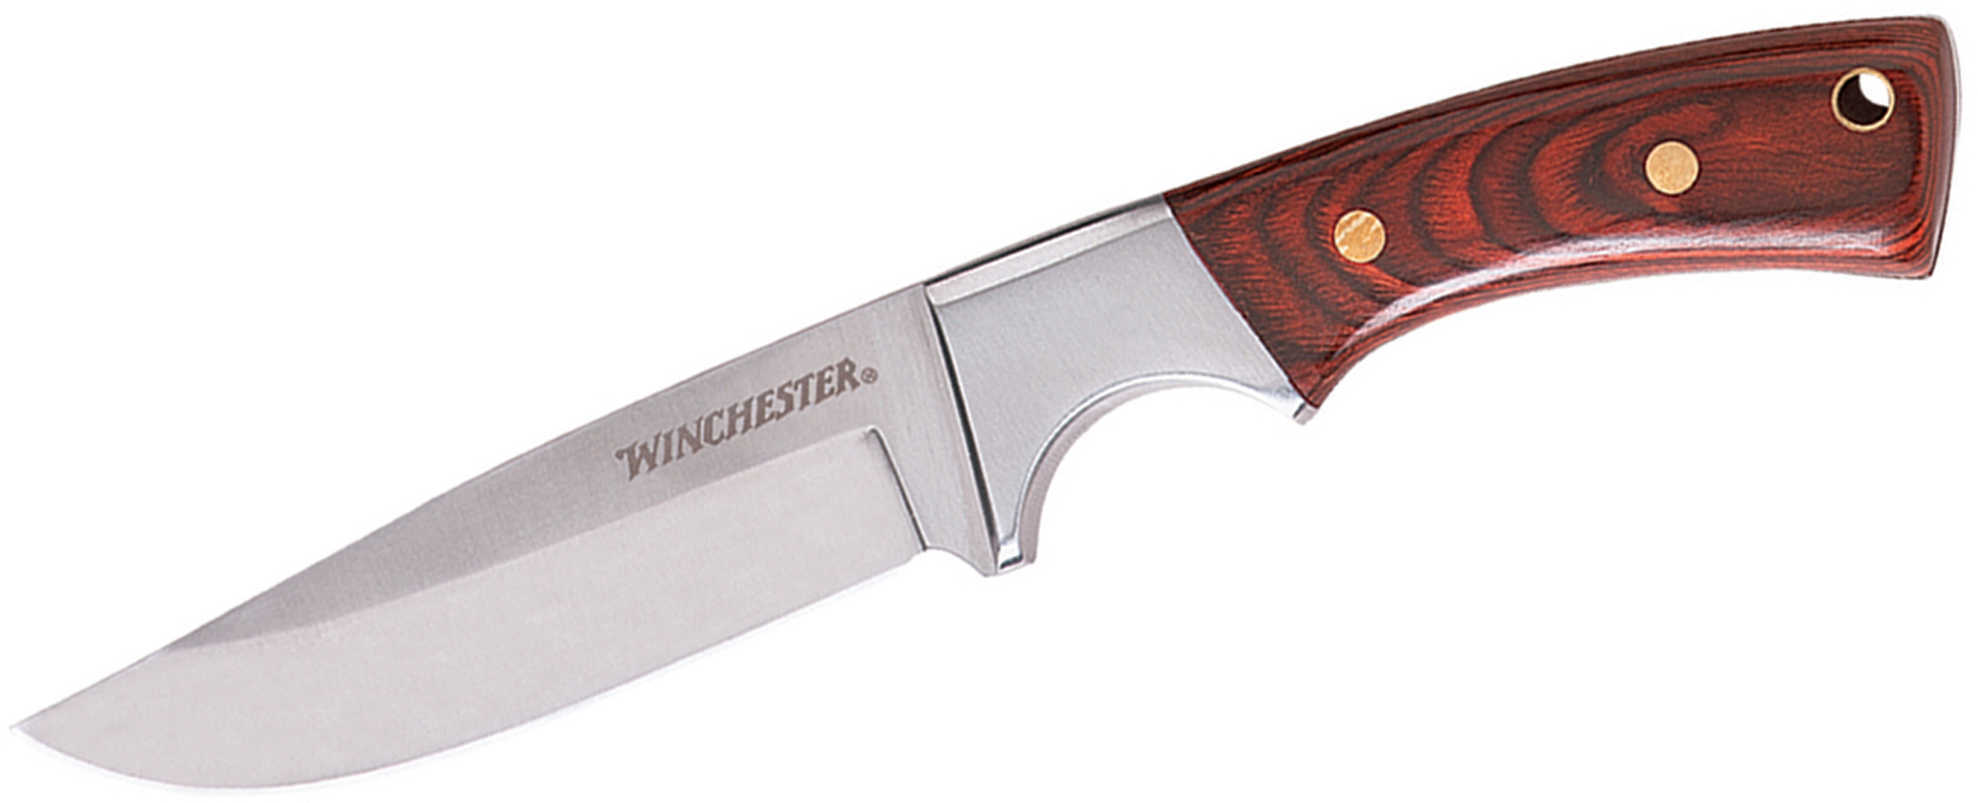 Winchester Knives Fixed Blade Small Wood Handle w/ Sheath 22-41340